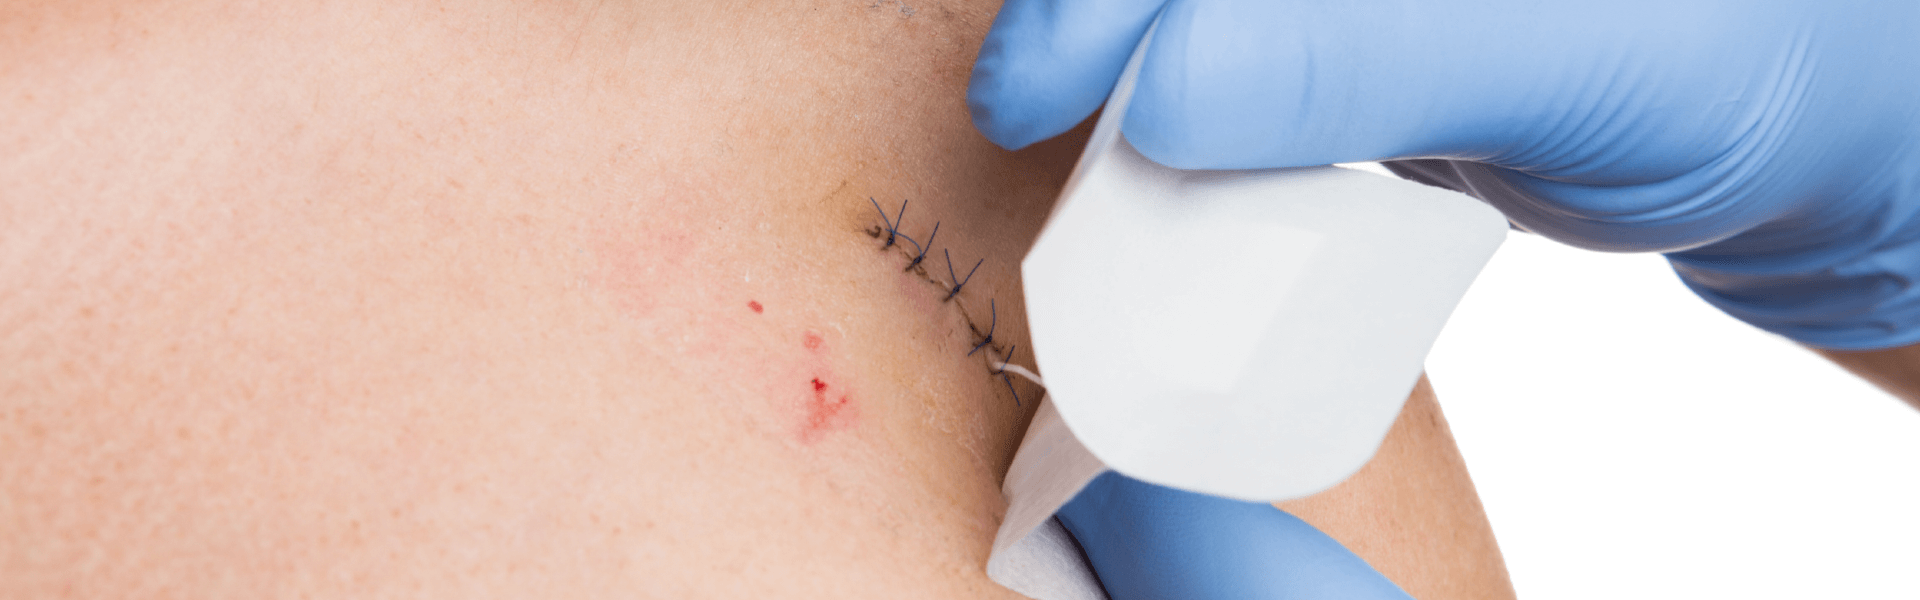 Suture Removal in Ghaziabad